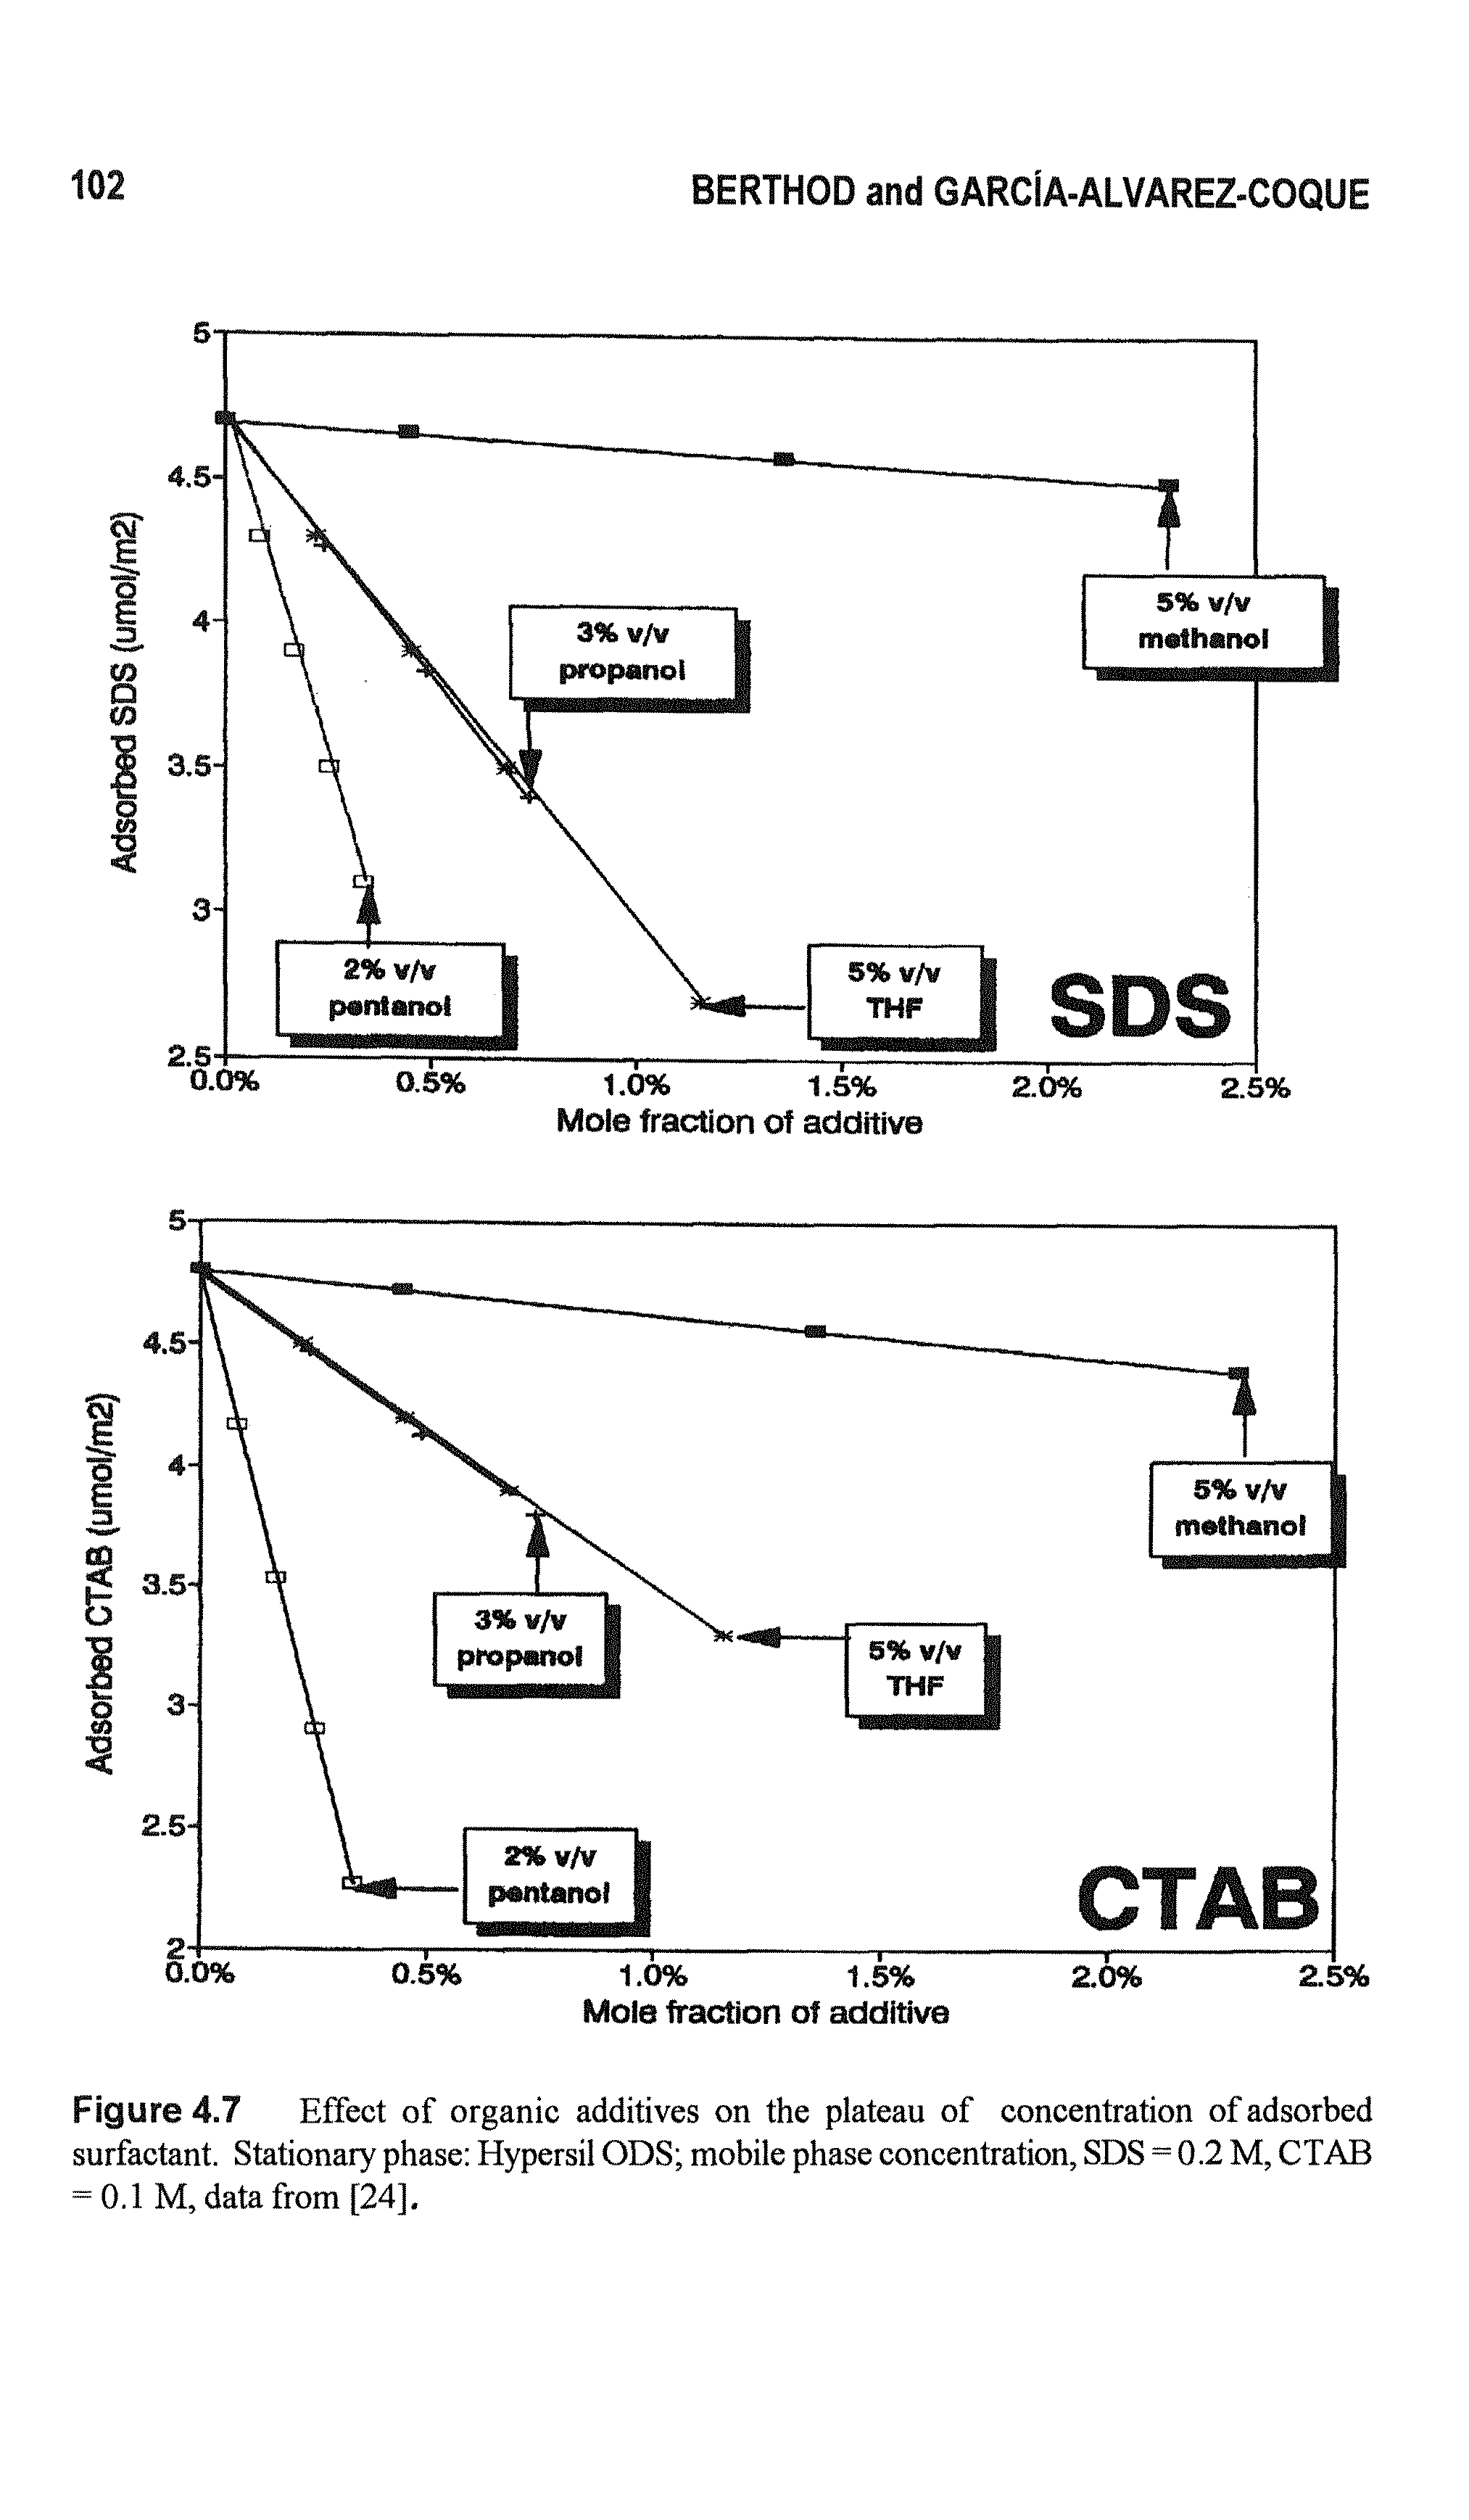 Figure 4.7 Effect of organic additives on the plateau of concentration of adsorbed surfactant. Stationary phase Hypersil ODS mobile phase concentration, SDS = 0.2 M, CTAB = 0.1 M, data from [24],...